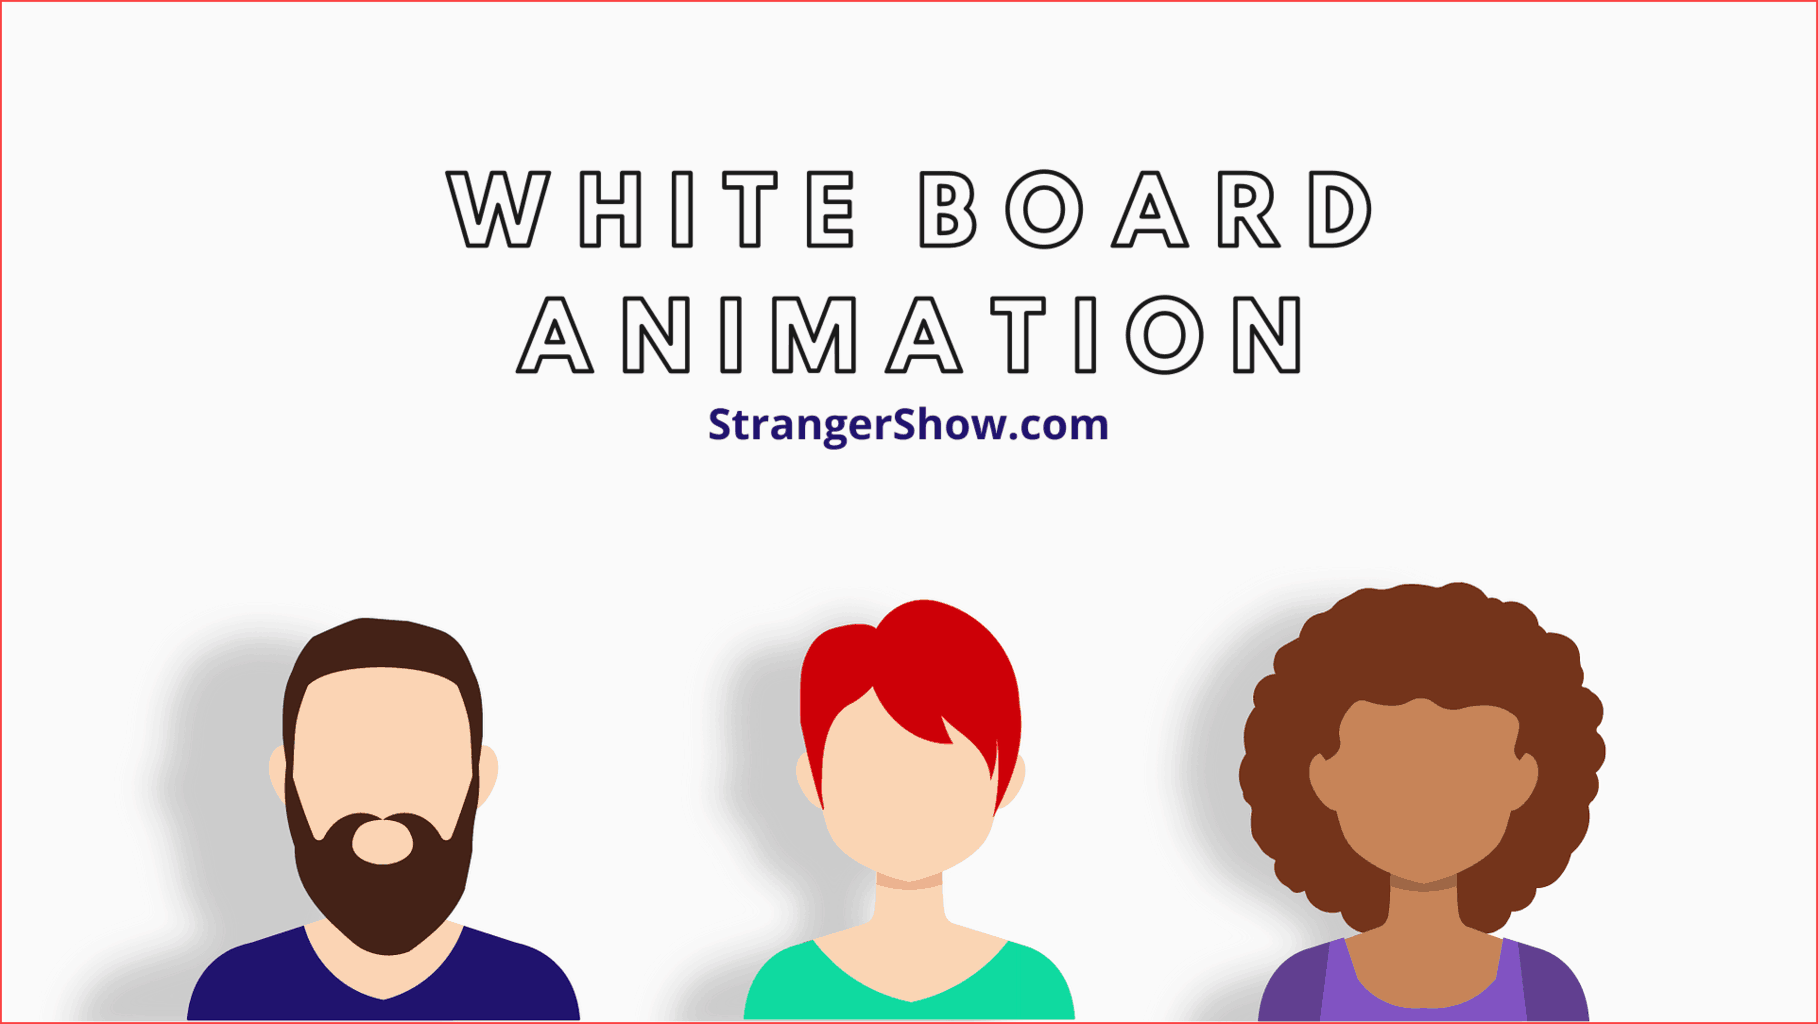 Whiteboard animation video Review